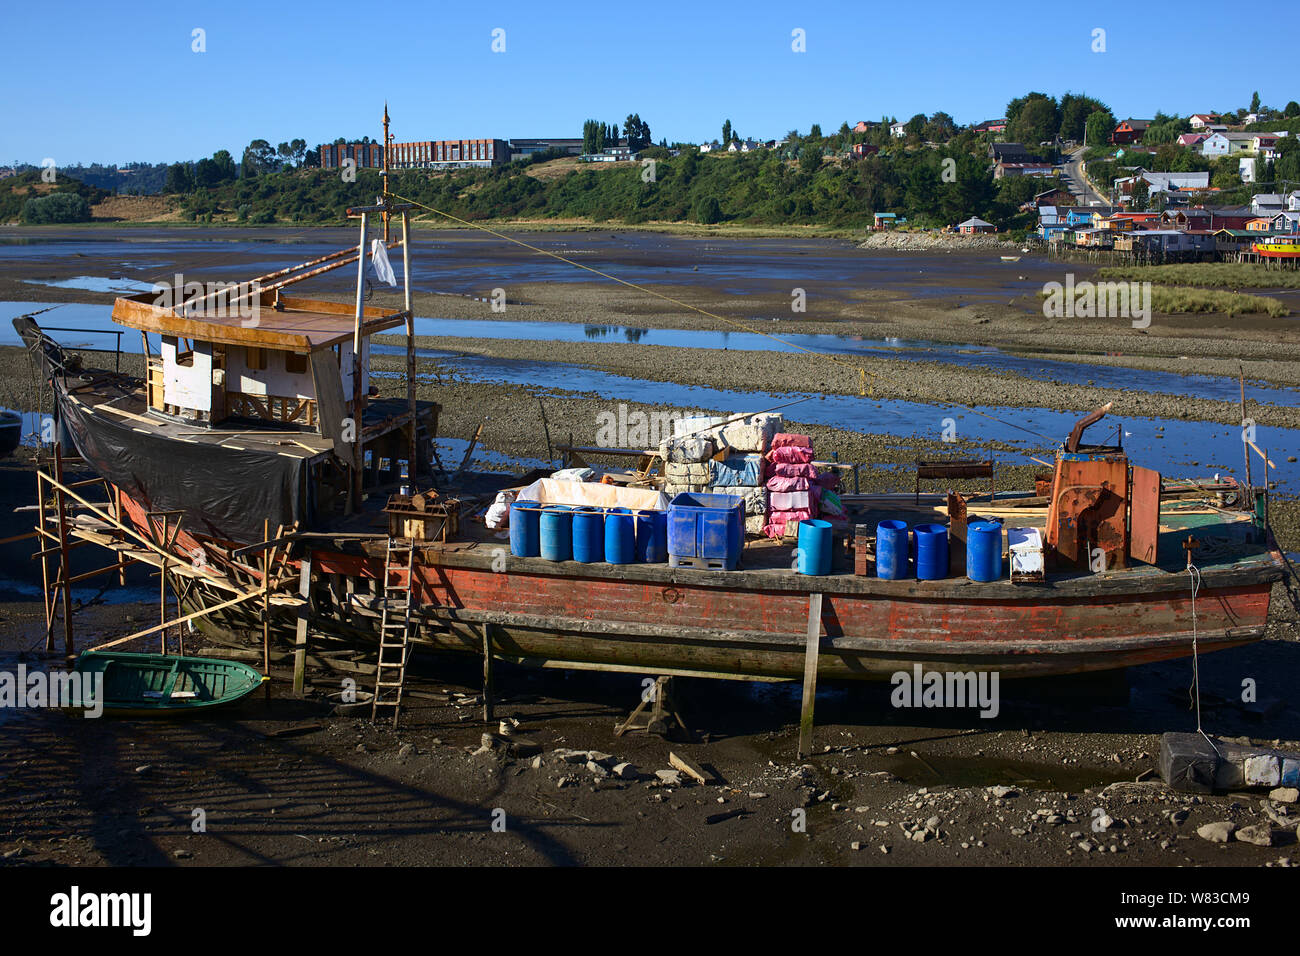 CASTRO, CHILE - FEBRUARY 6, 2016: Old wooden ship at low tide in the riverbed of the Gamboa River in Castro, Chiloe Archipelago in Chile Stock Photo